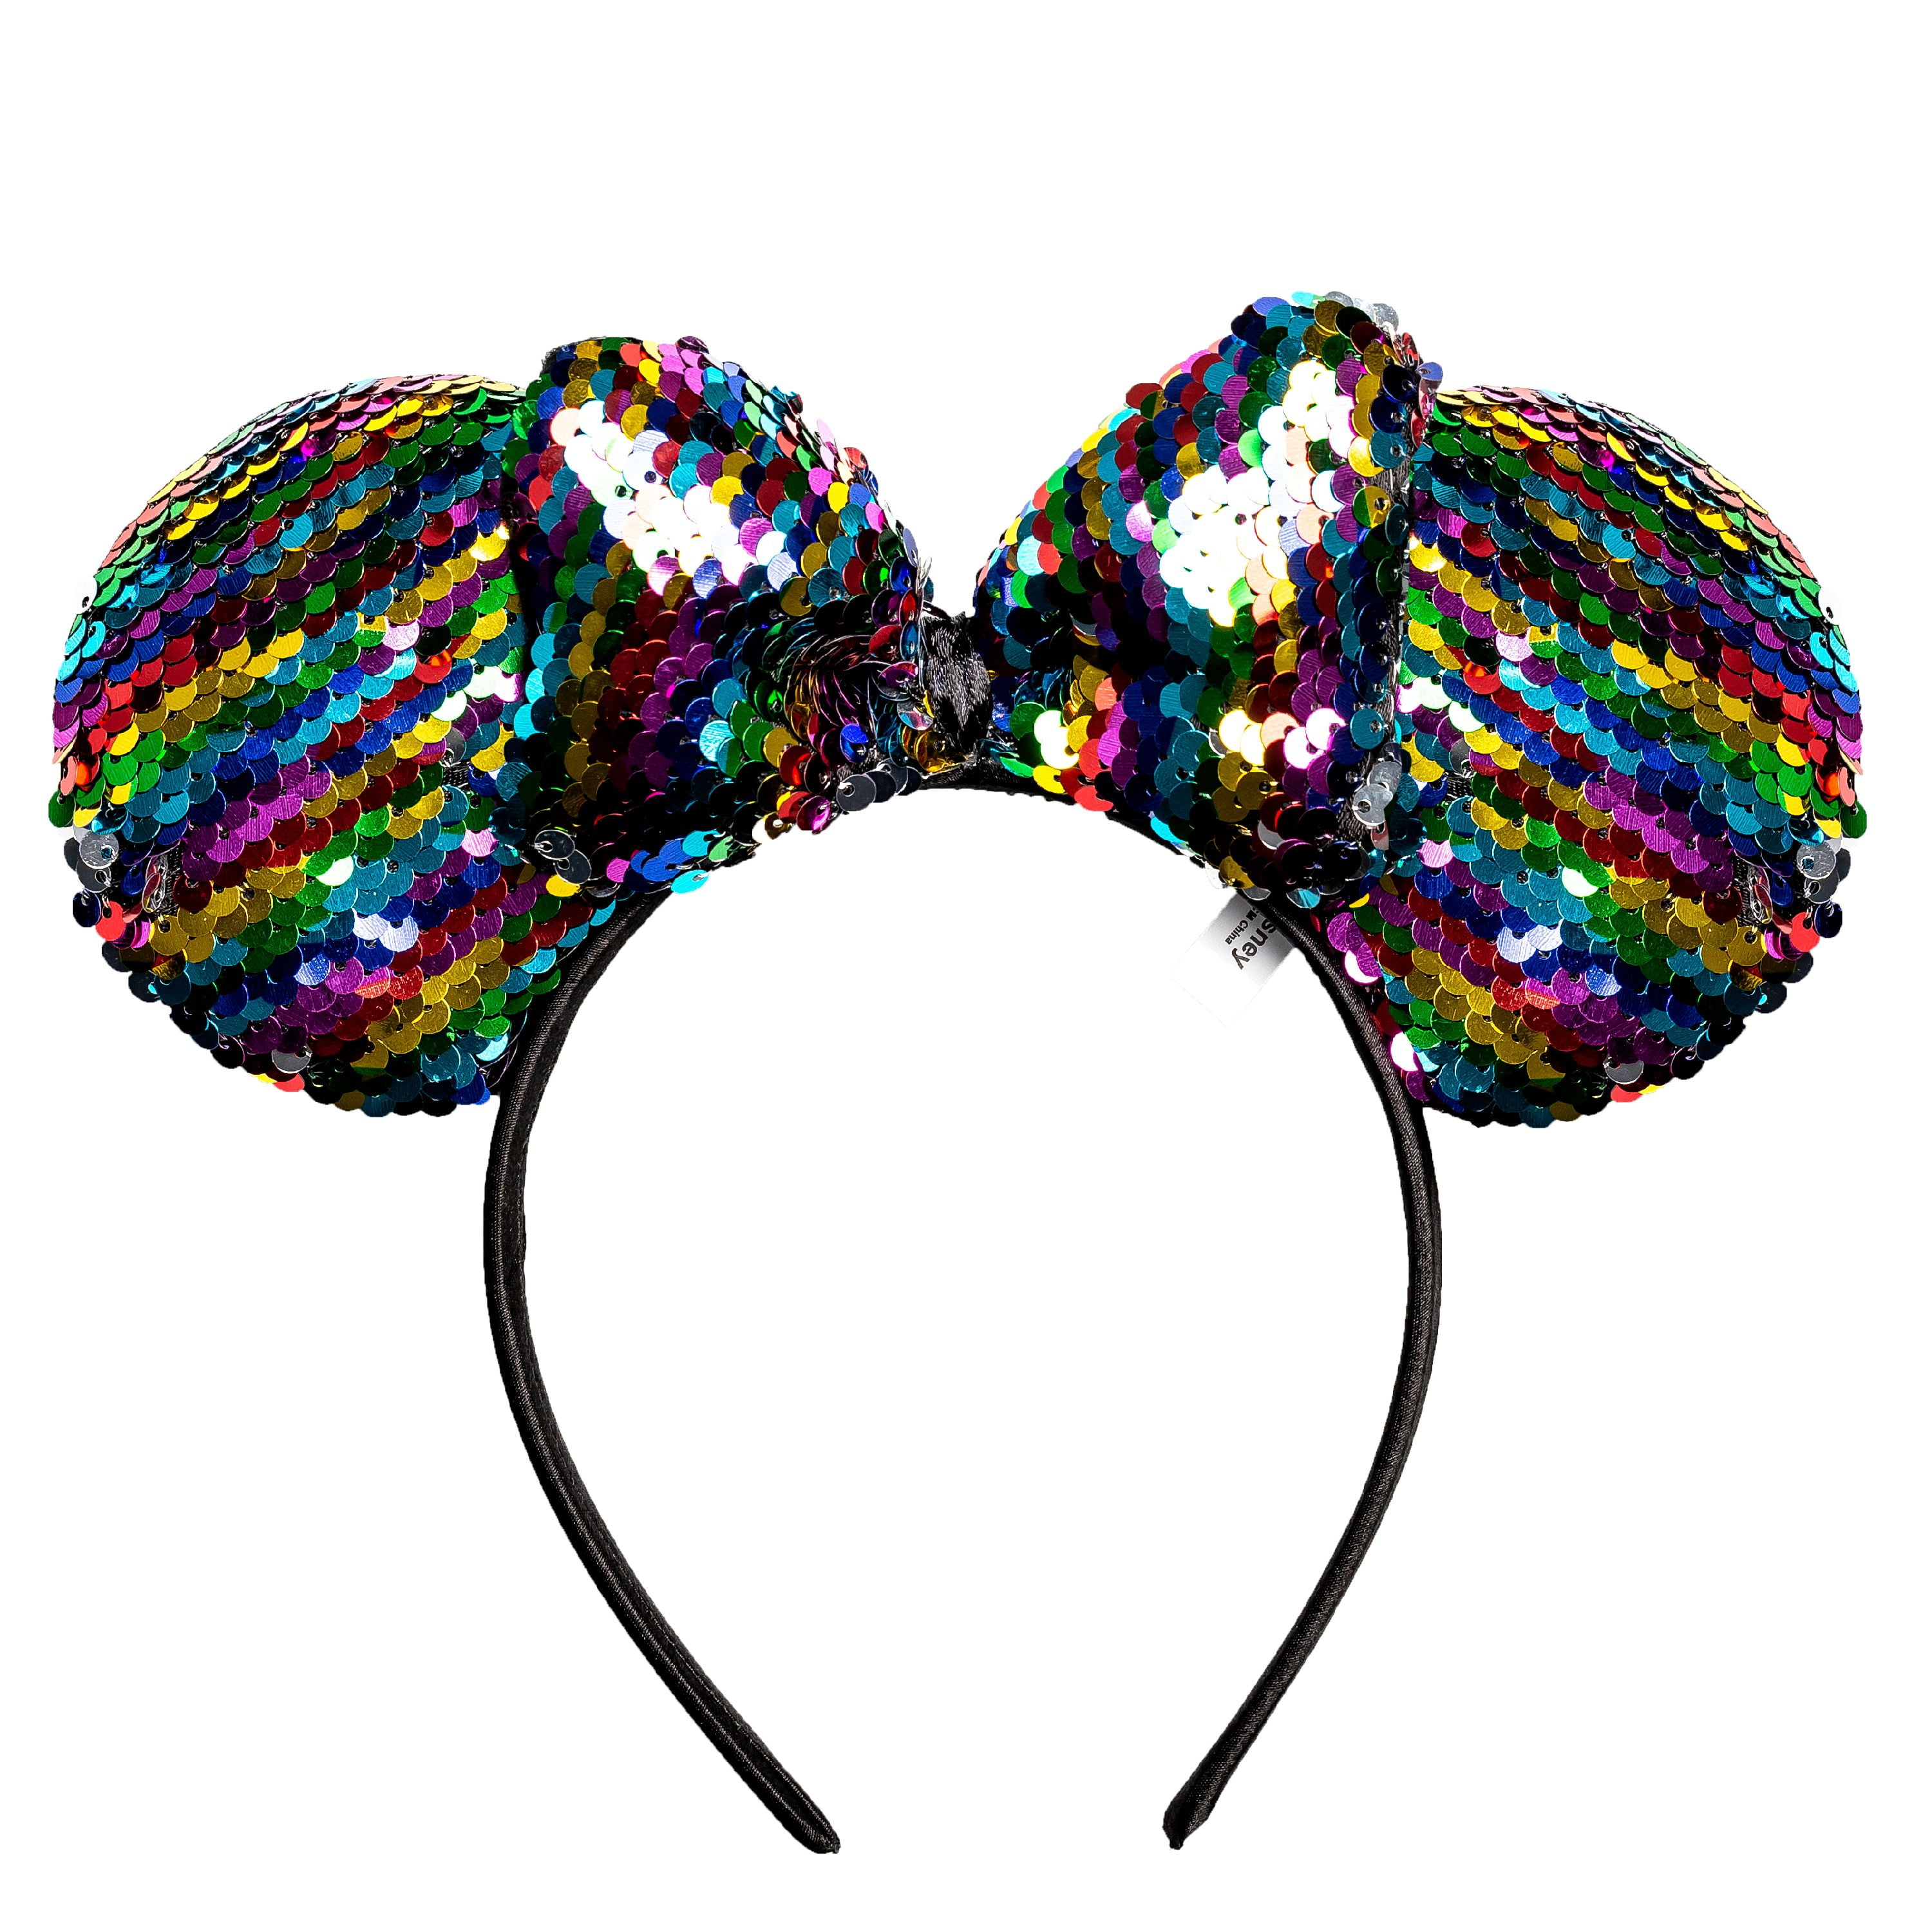 Details about   Minnie Ears Candle 2020 Girl Gift Sequins Multicolor Disney Parks Headband 